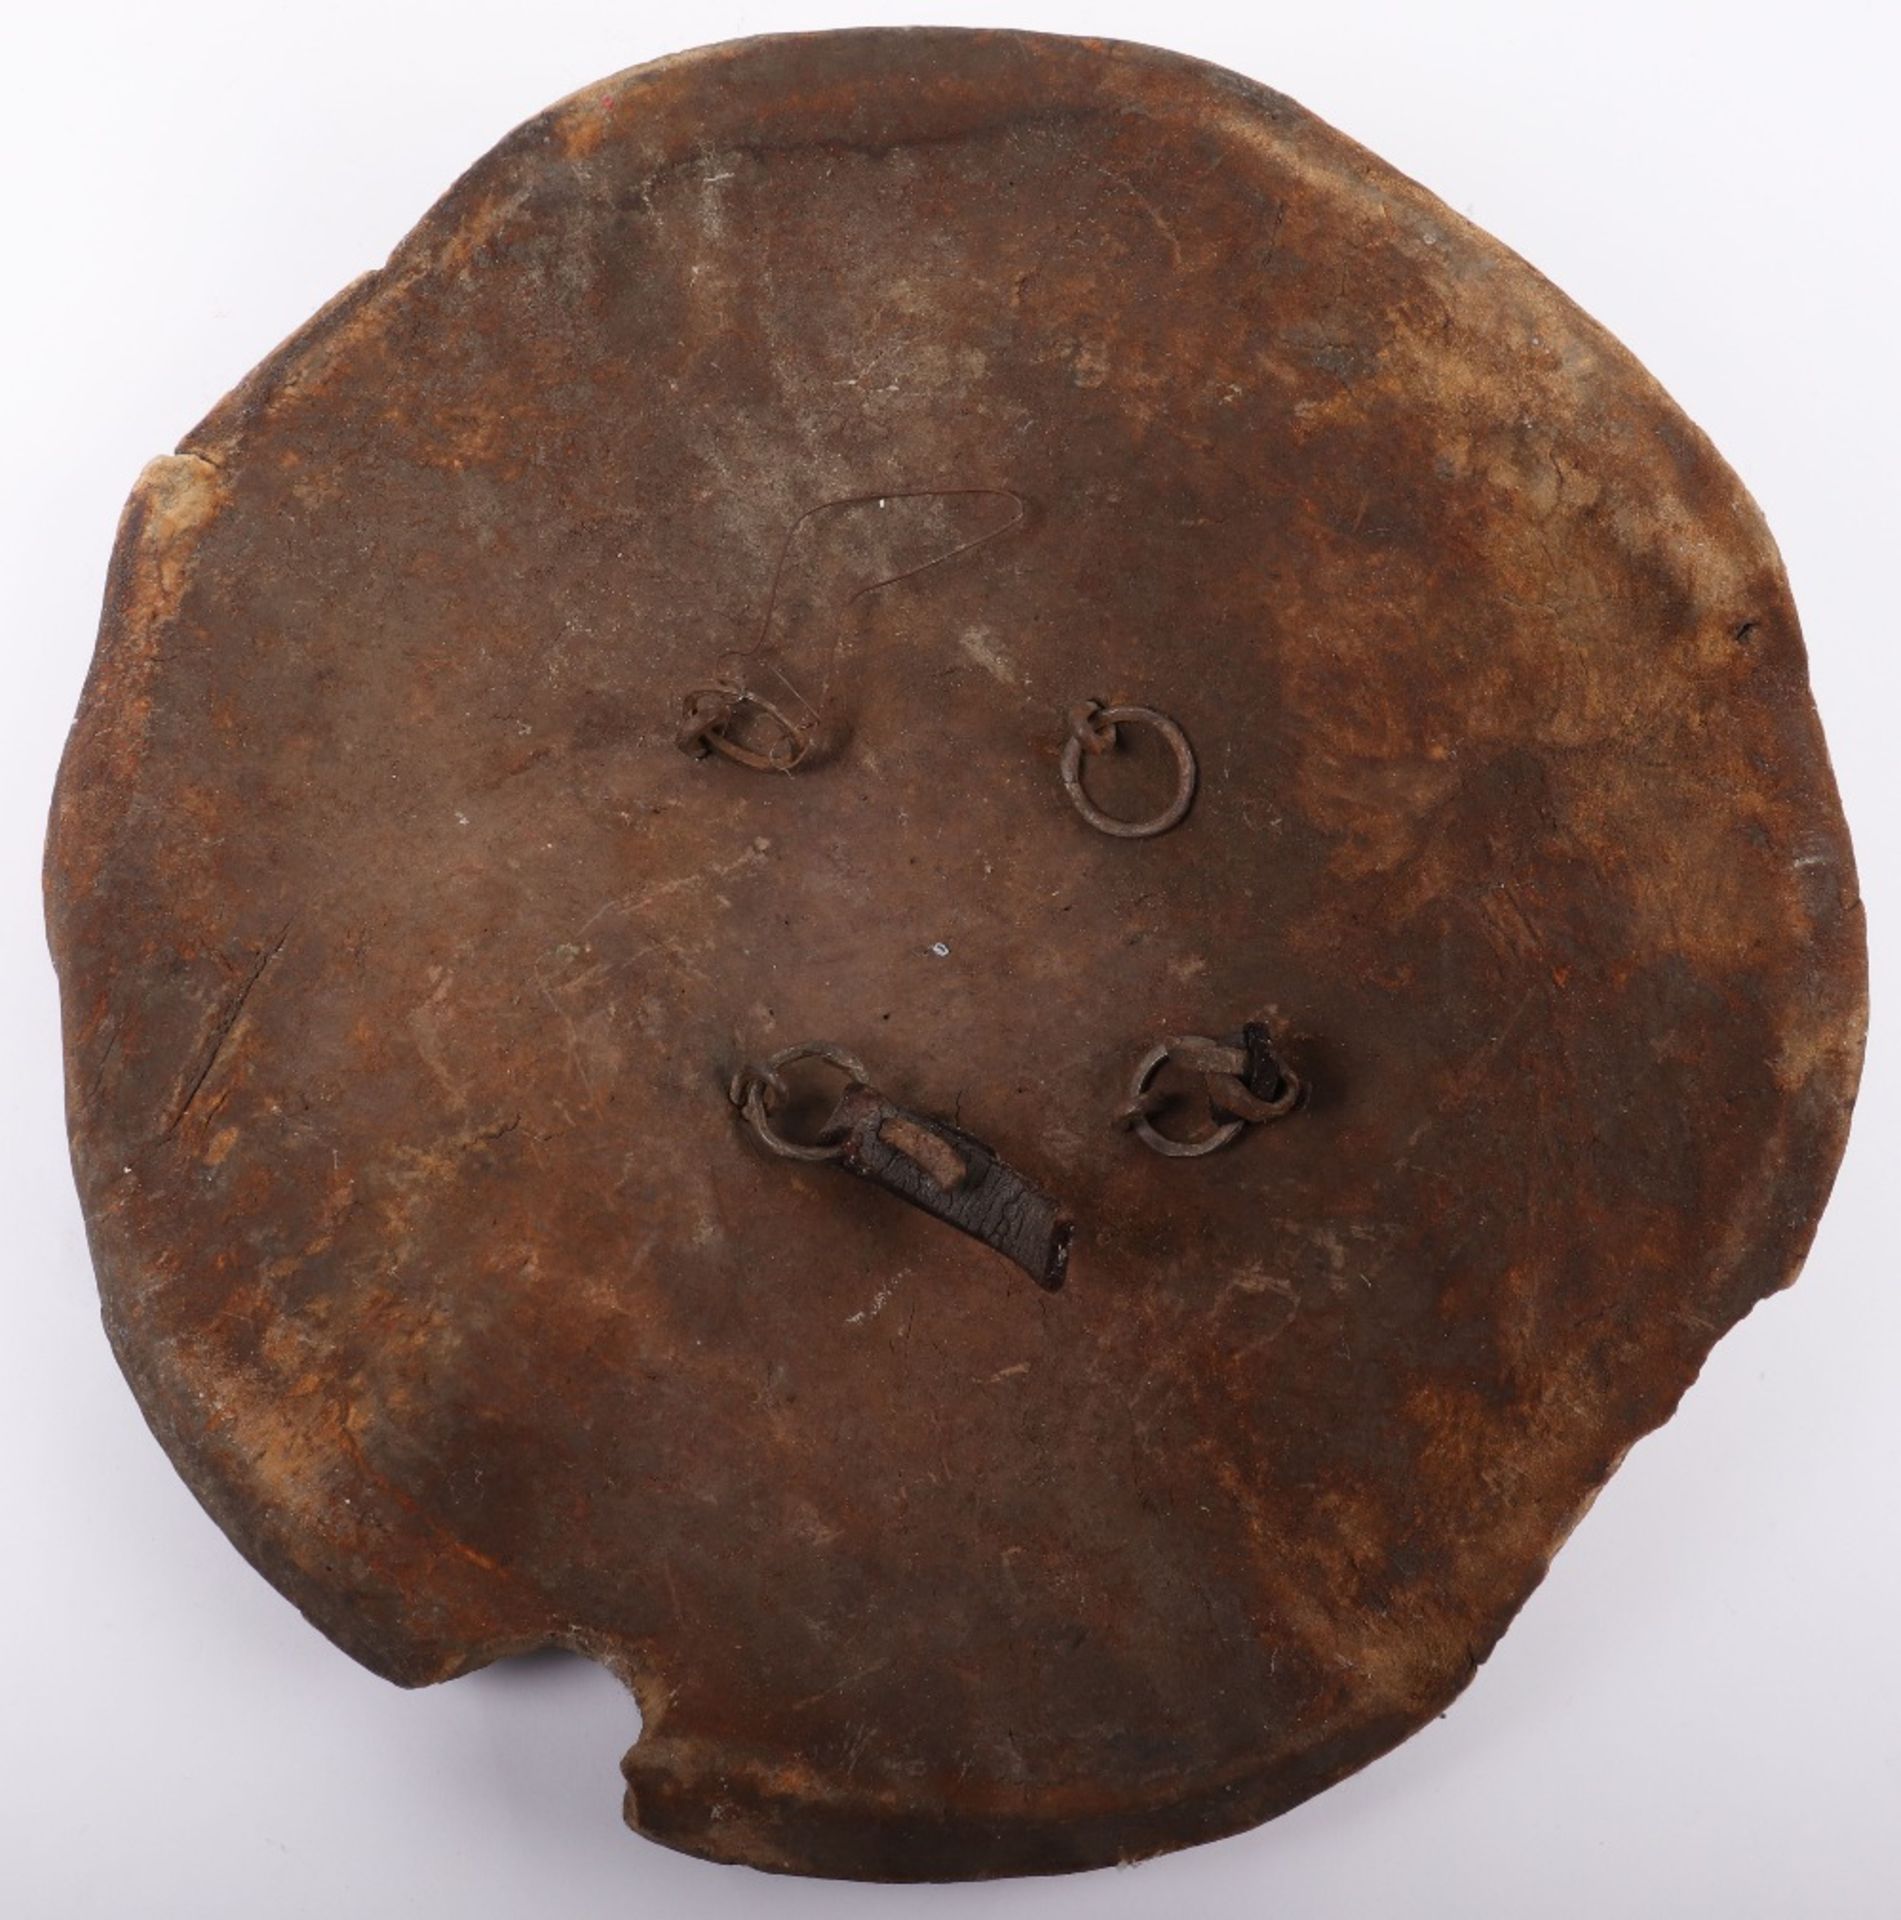 Indian Hide Shield Dhal, Probably 18th or 19th Century - Image 7 of 8